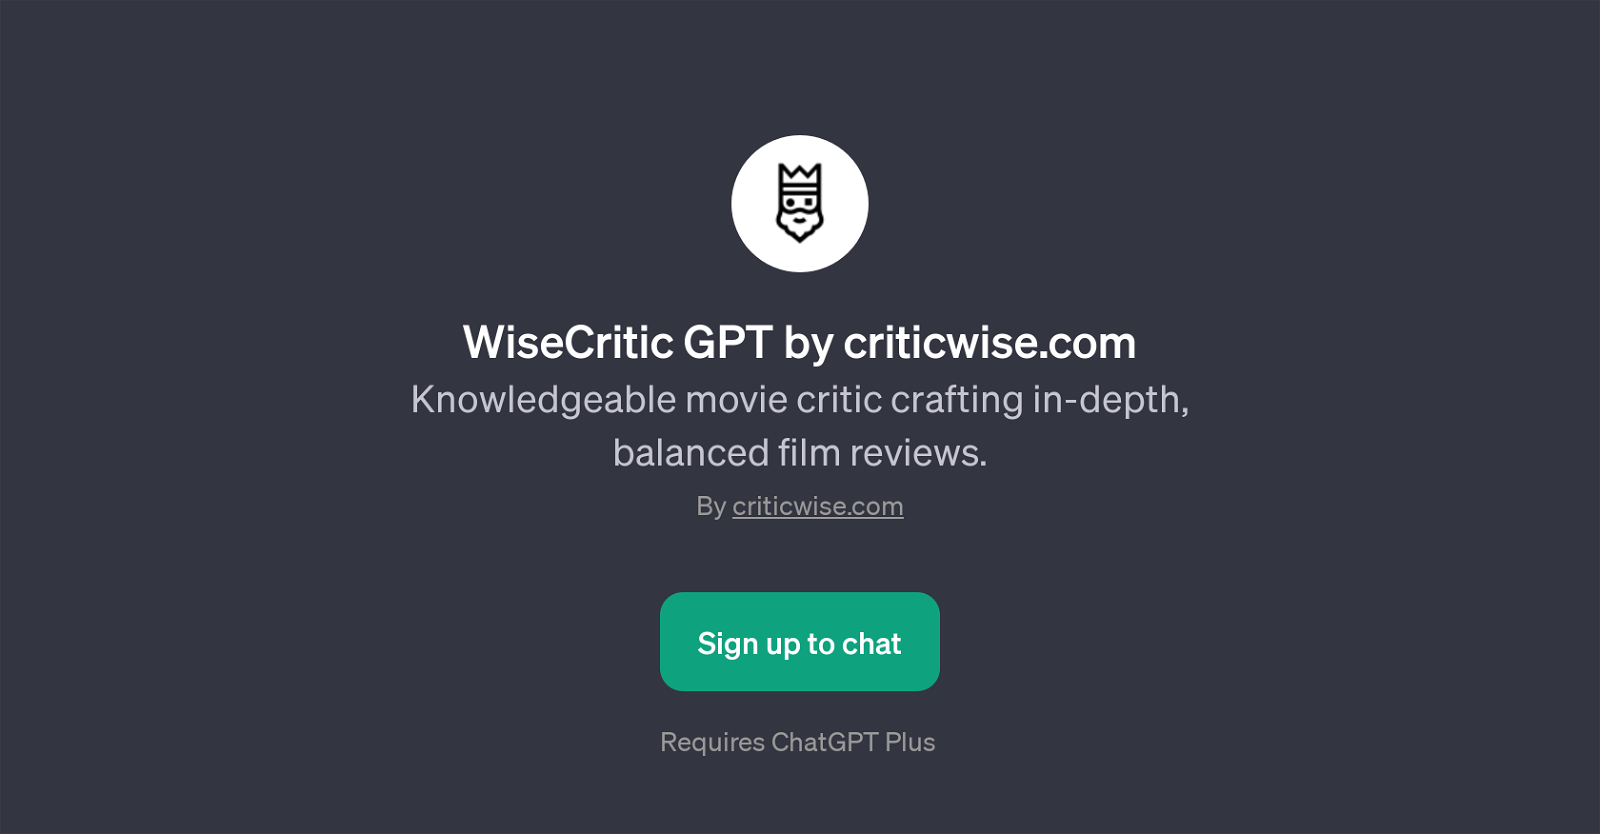 WiseCritic GPT by criticwise.com website